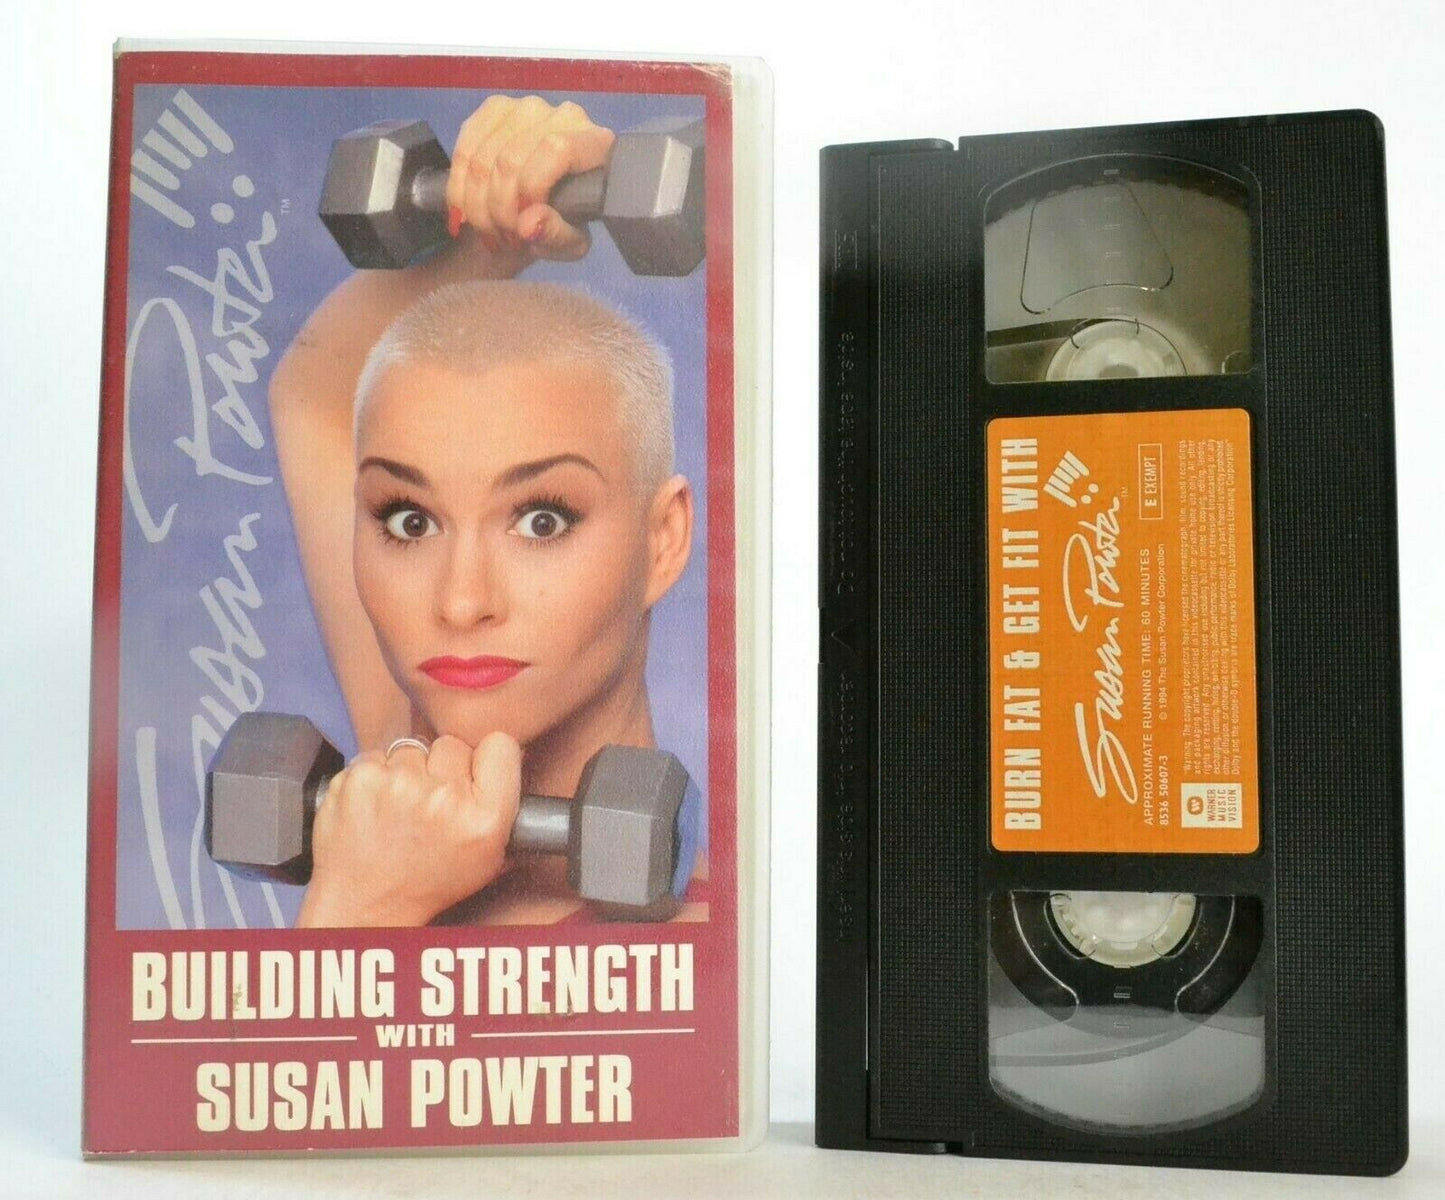 Building Strength: By Susan Powter - Exercises - Fitness - Body Workout - VHS-